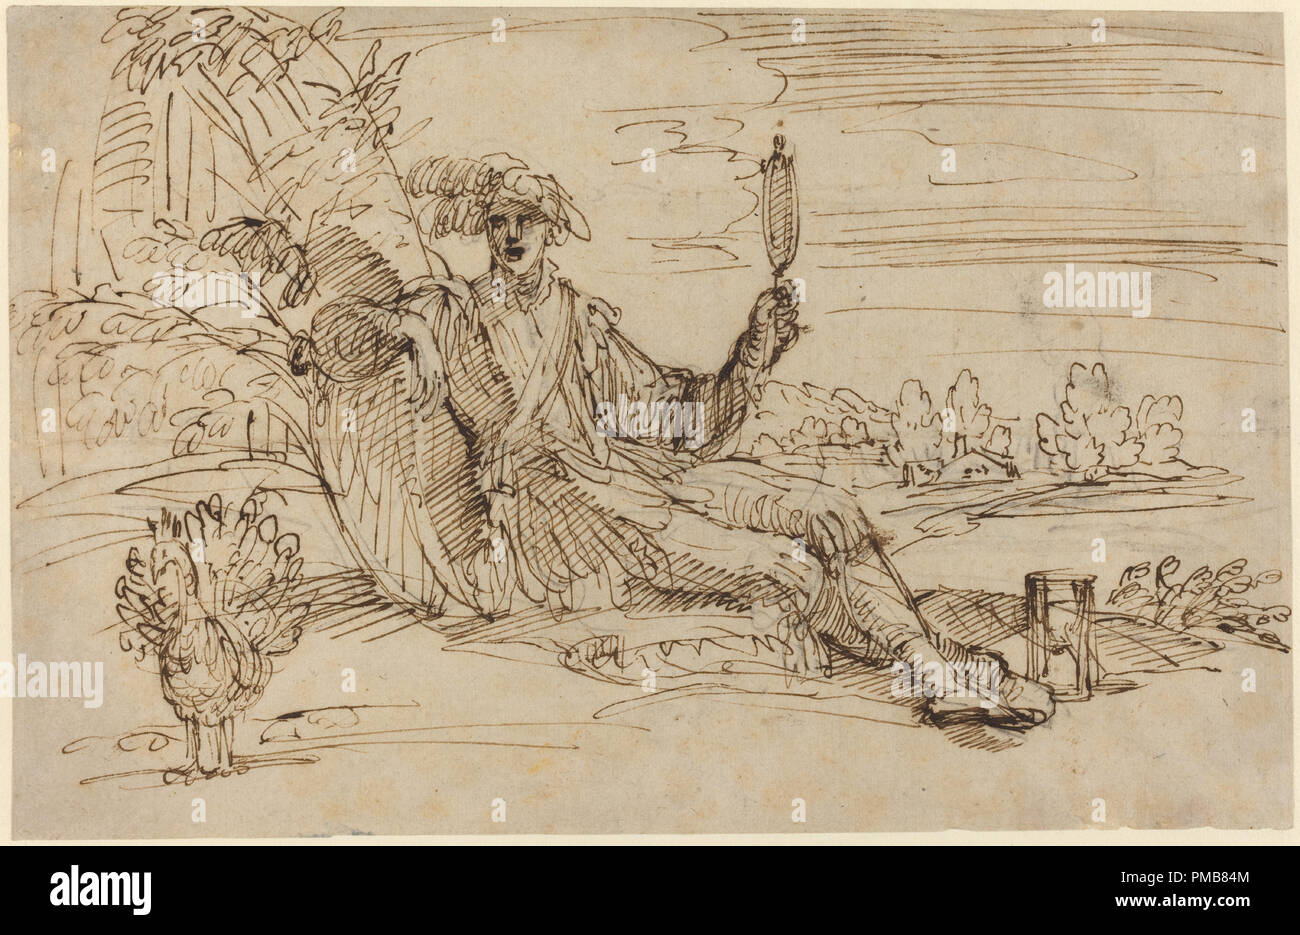 An Elegant Young Man Personifying Vanity. Dimensions: overall: 19.5 x 29.9 cm (7 11/16 x 11 3/4 in.). Medium: pen and brown ink over black chalk on laid paper. Museum: National Gallery of Art, Washington DC. Author: Francesco Brizio. Stock Photo